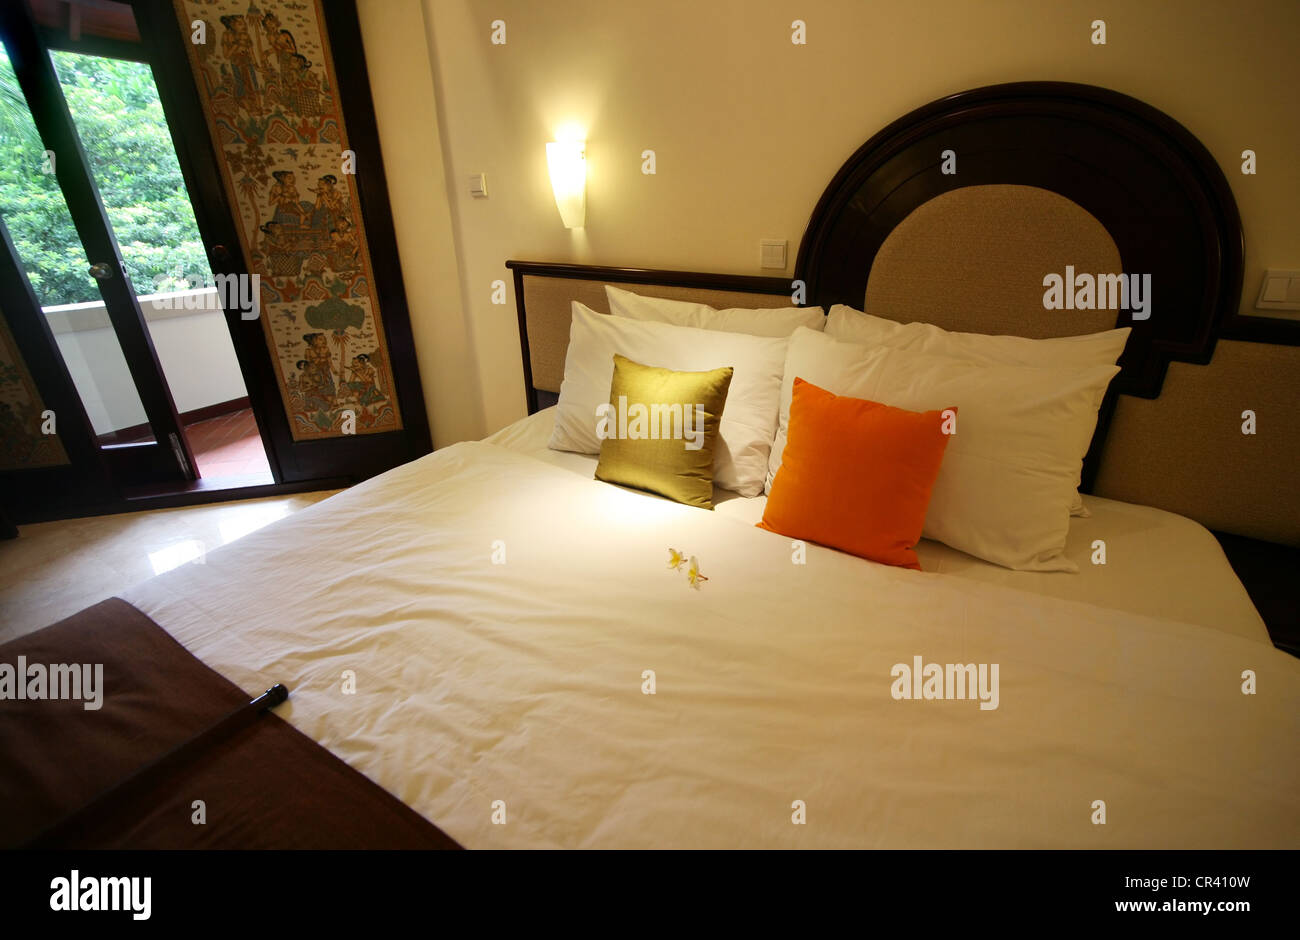 Nice Bedroom With The Big Bed Stock Photo Alamy